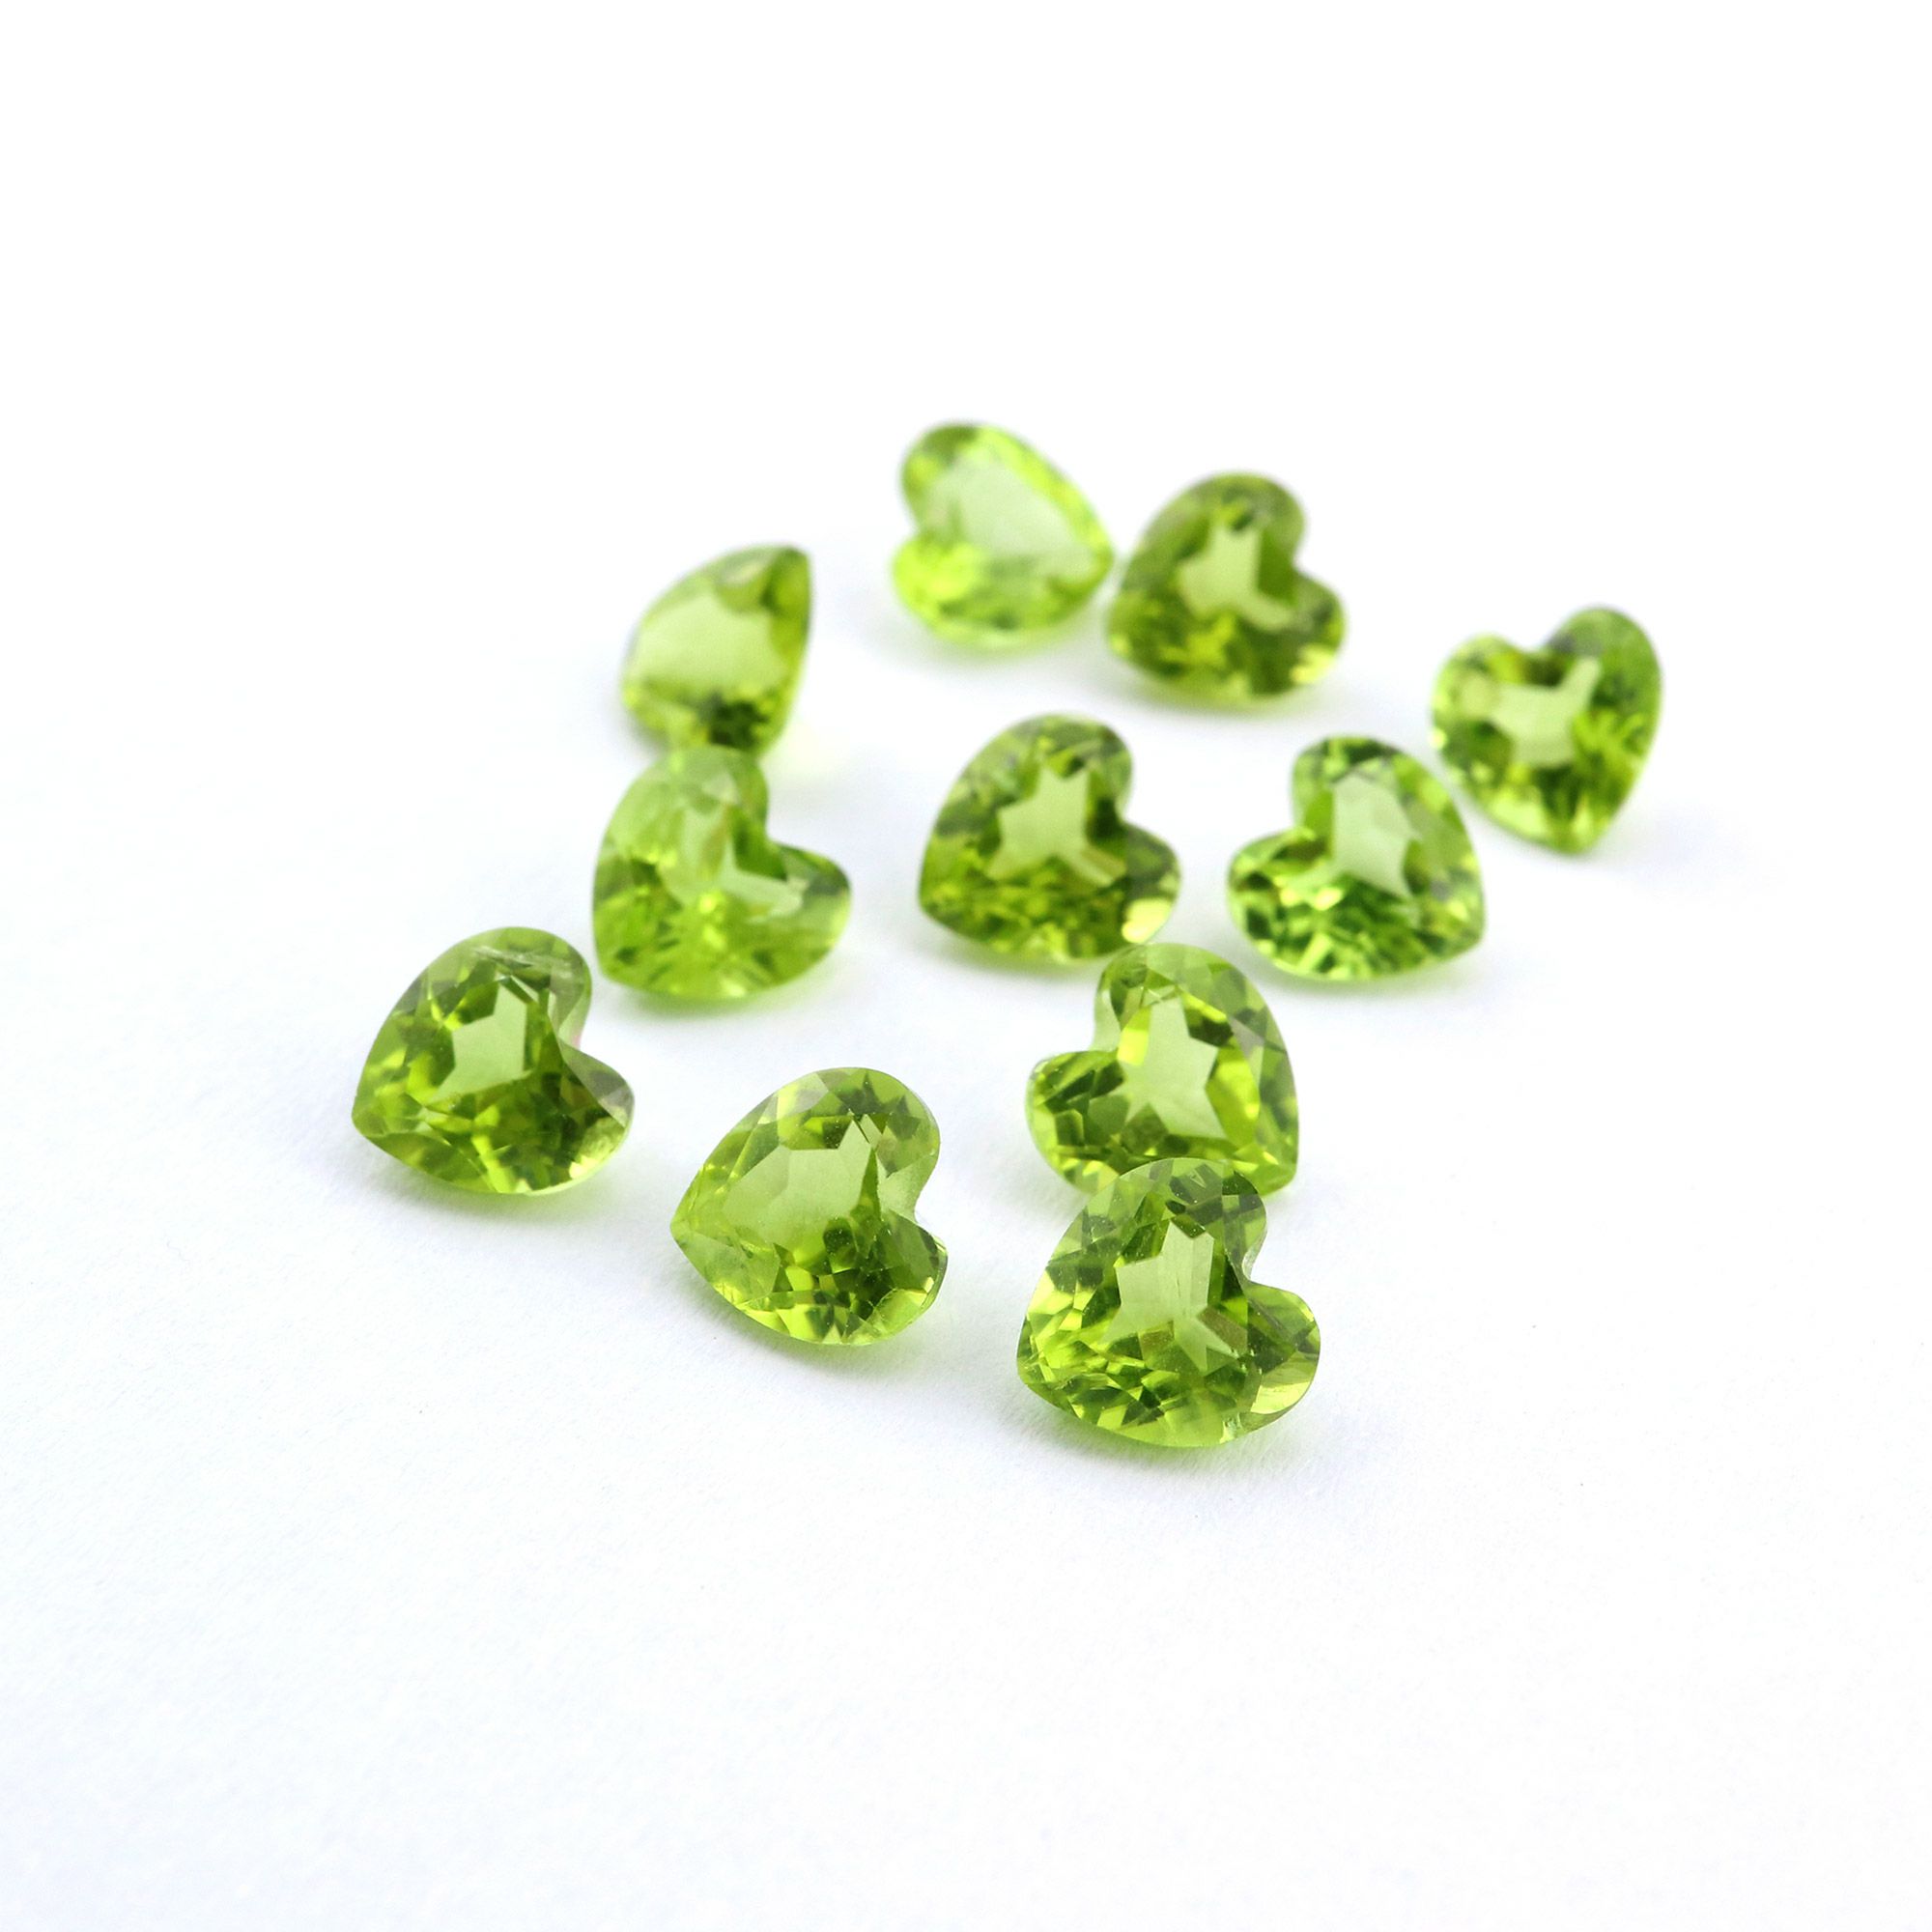 5Pcs 4-8MM Heart Green Peridot August Birthstone Faceted Cut Loose Gemstone Natural Semi Precious Stone DIY Jewelry Supplies 4130010 - Click Image to Close